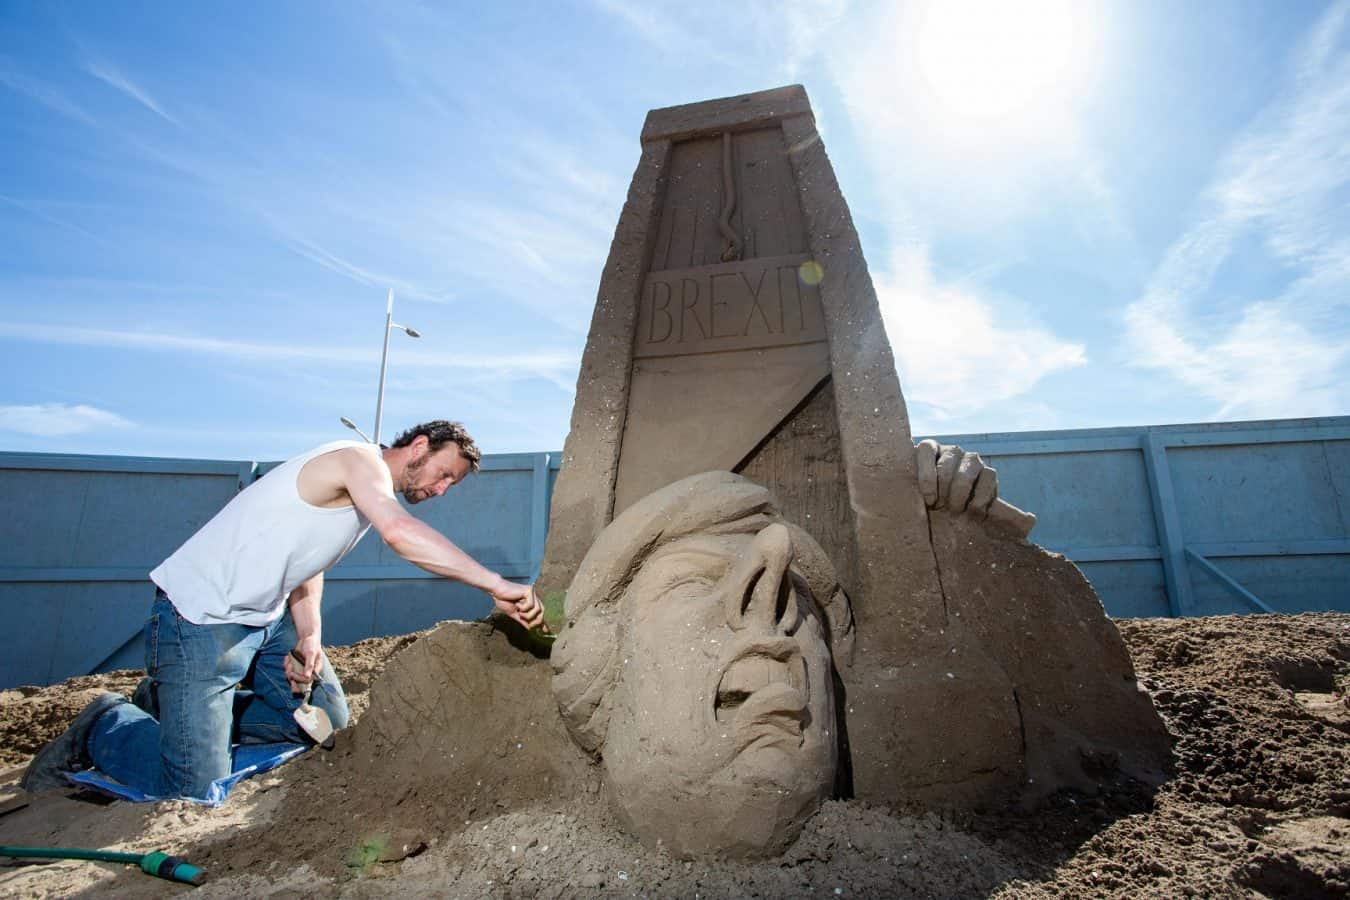 Sand artist creates giant sculpture of Theresa May losing her head under Brexit guillotine